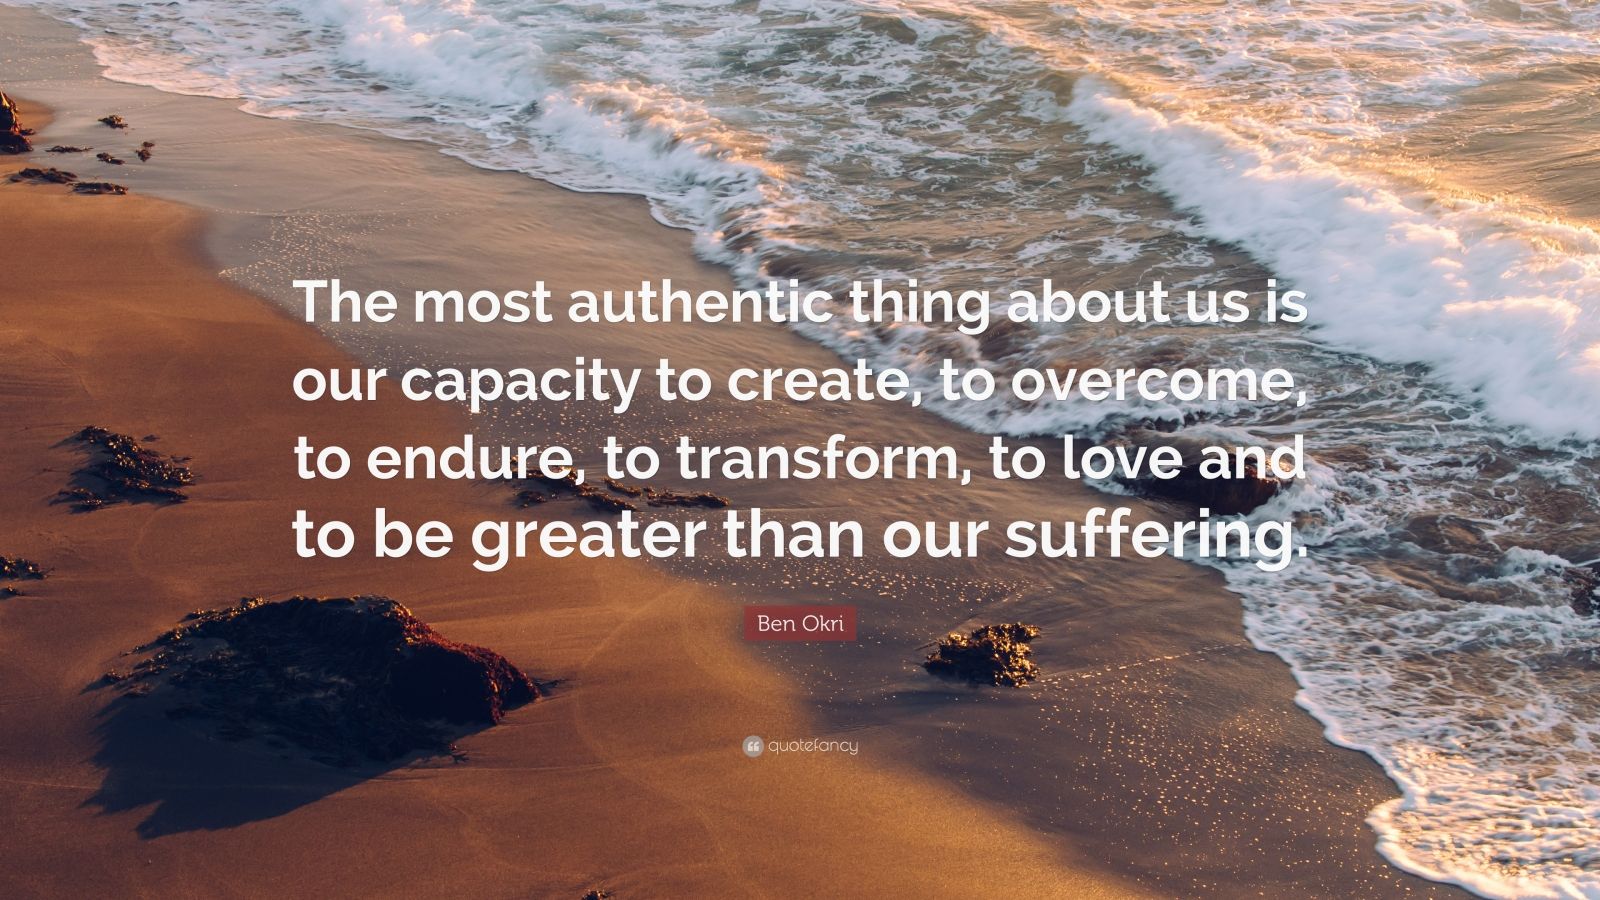 Ben Okri Quote: “The most authentic thing about us is our capacity to ...